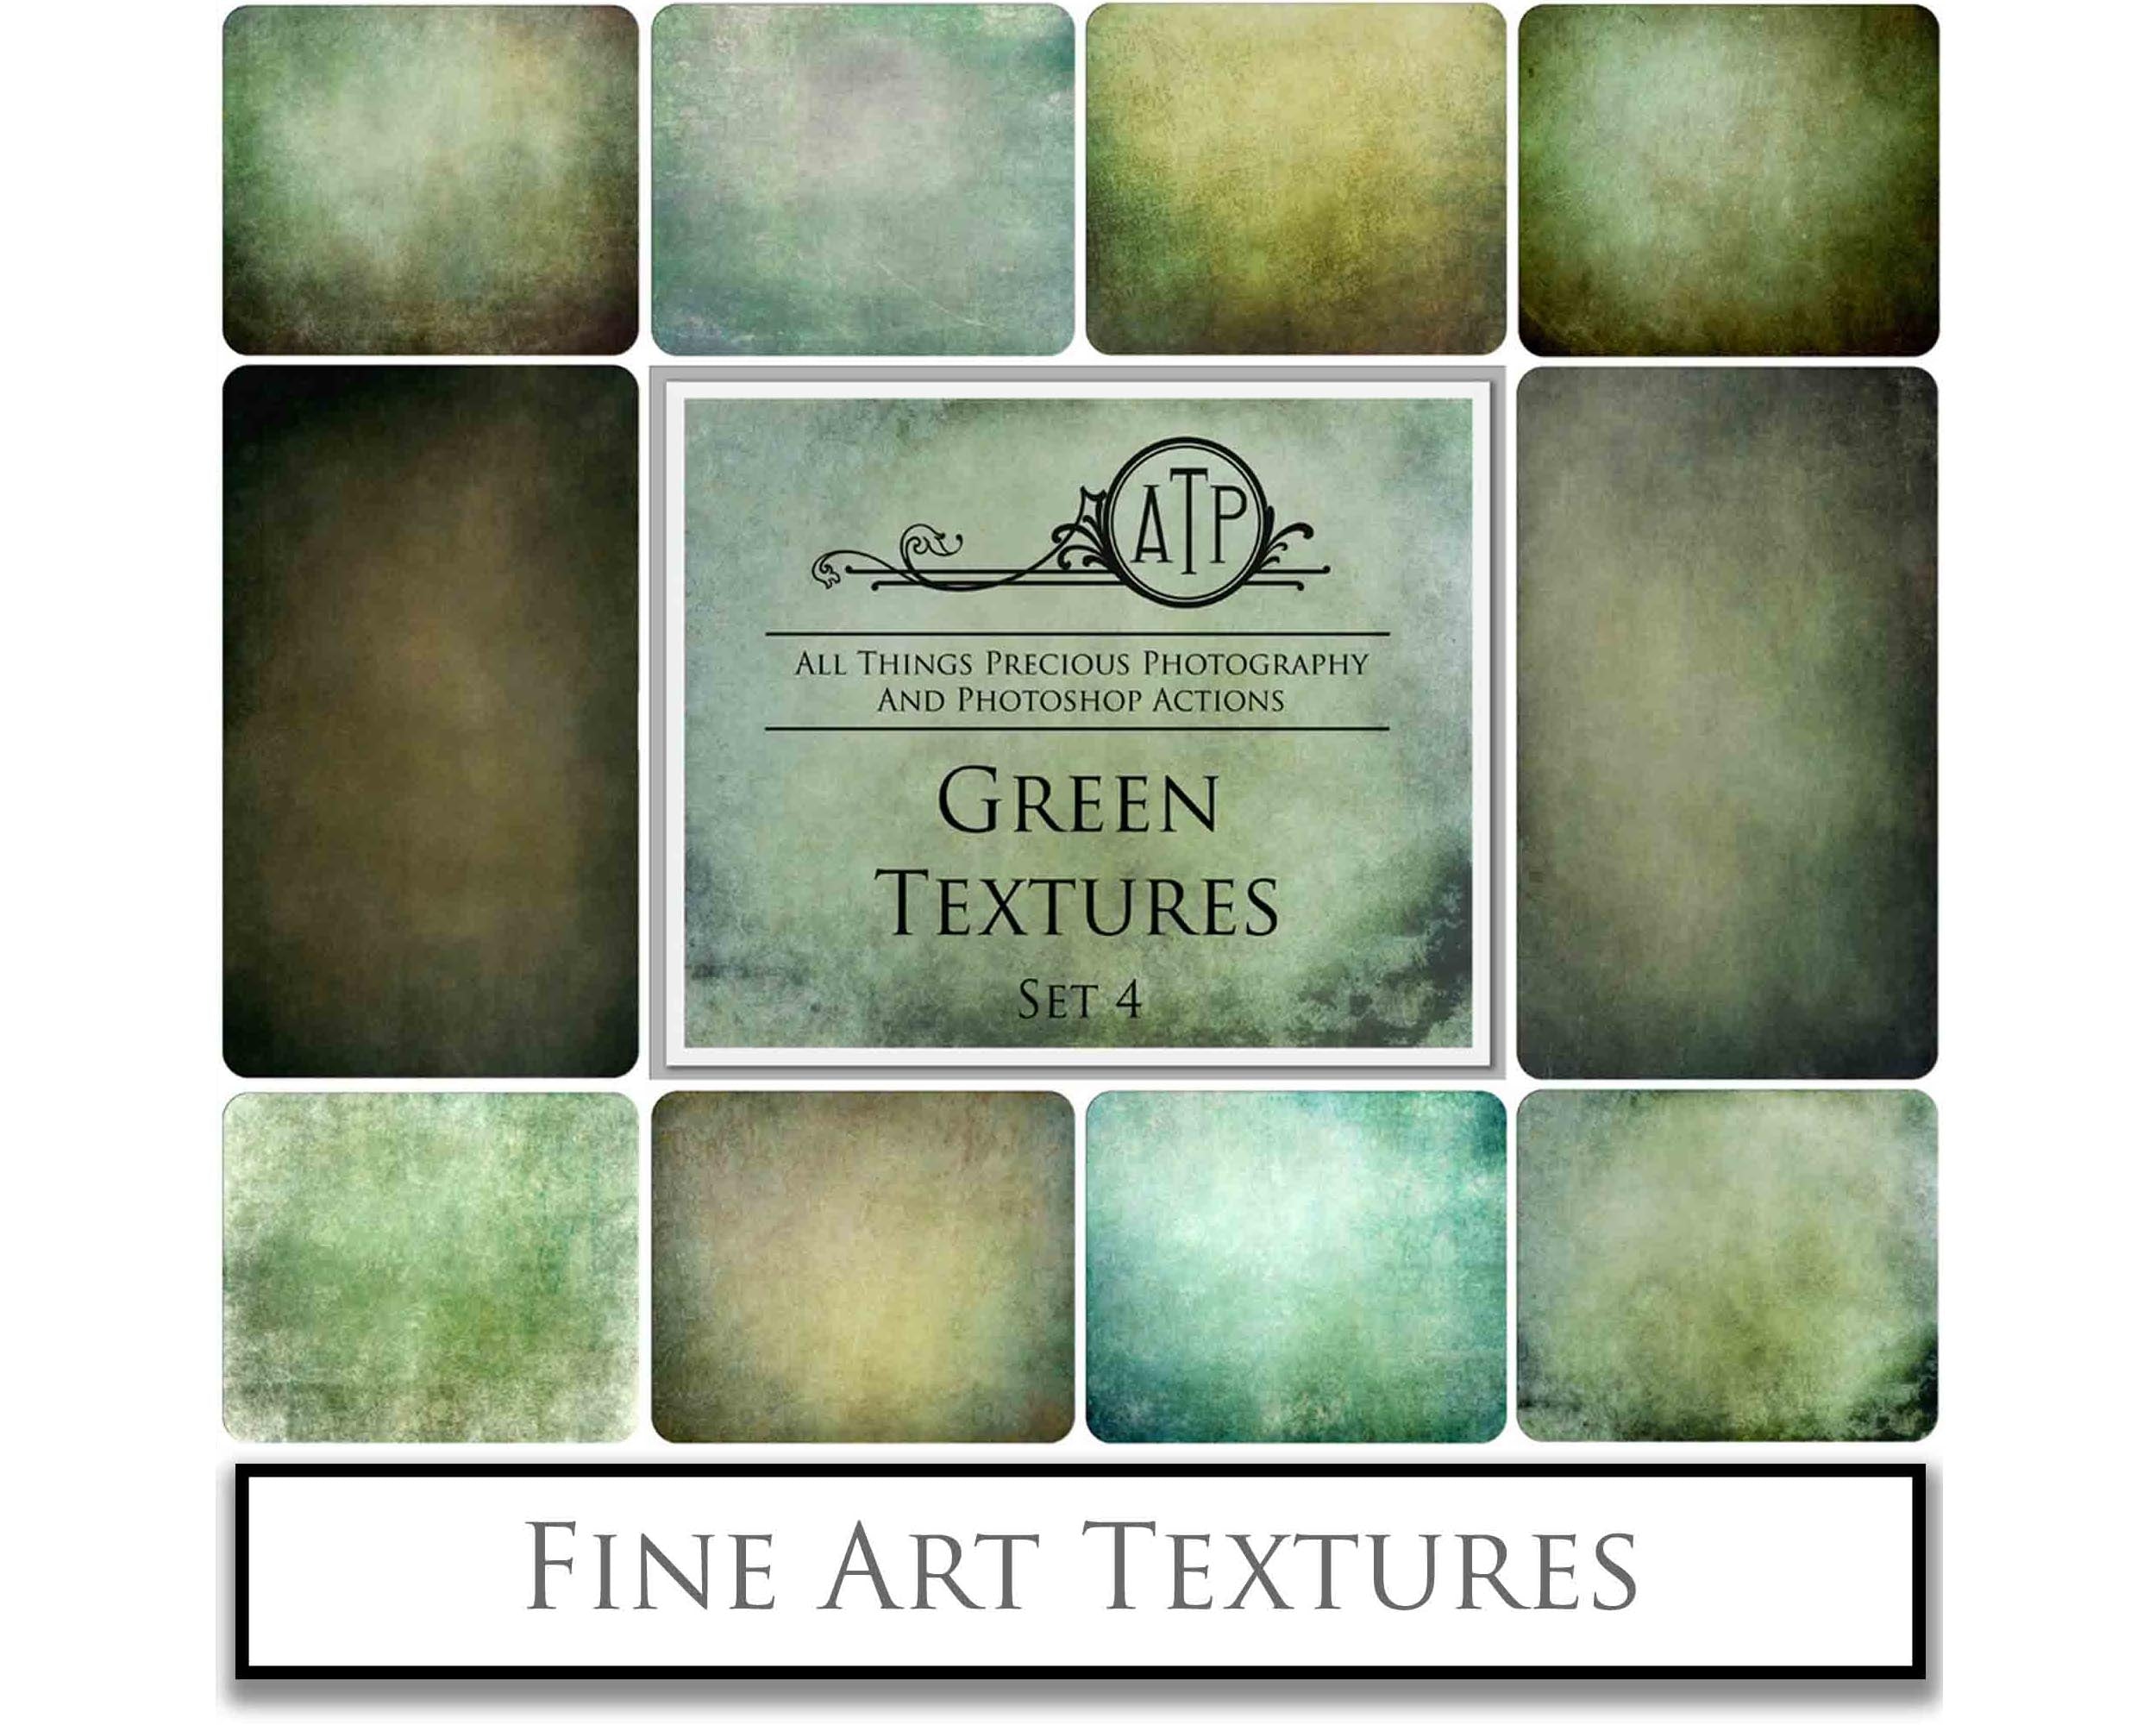 Vibrant Green textures. Fine art textures. Rich, Nature colour tints. Texture for photographers and digital editing. Photo Overlays. Antique, Vintage, Grunge, Light, Dark Bundle. Textured printable Canvas, Colour, Monochrome, Bundle. High resolution, 300dpi Graphic Assets for photography, digital scrapbooking and design. By ATP Textures